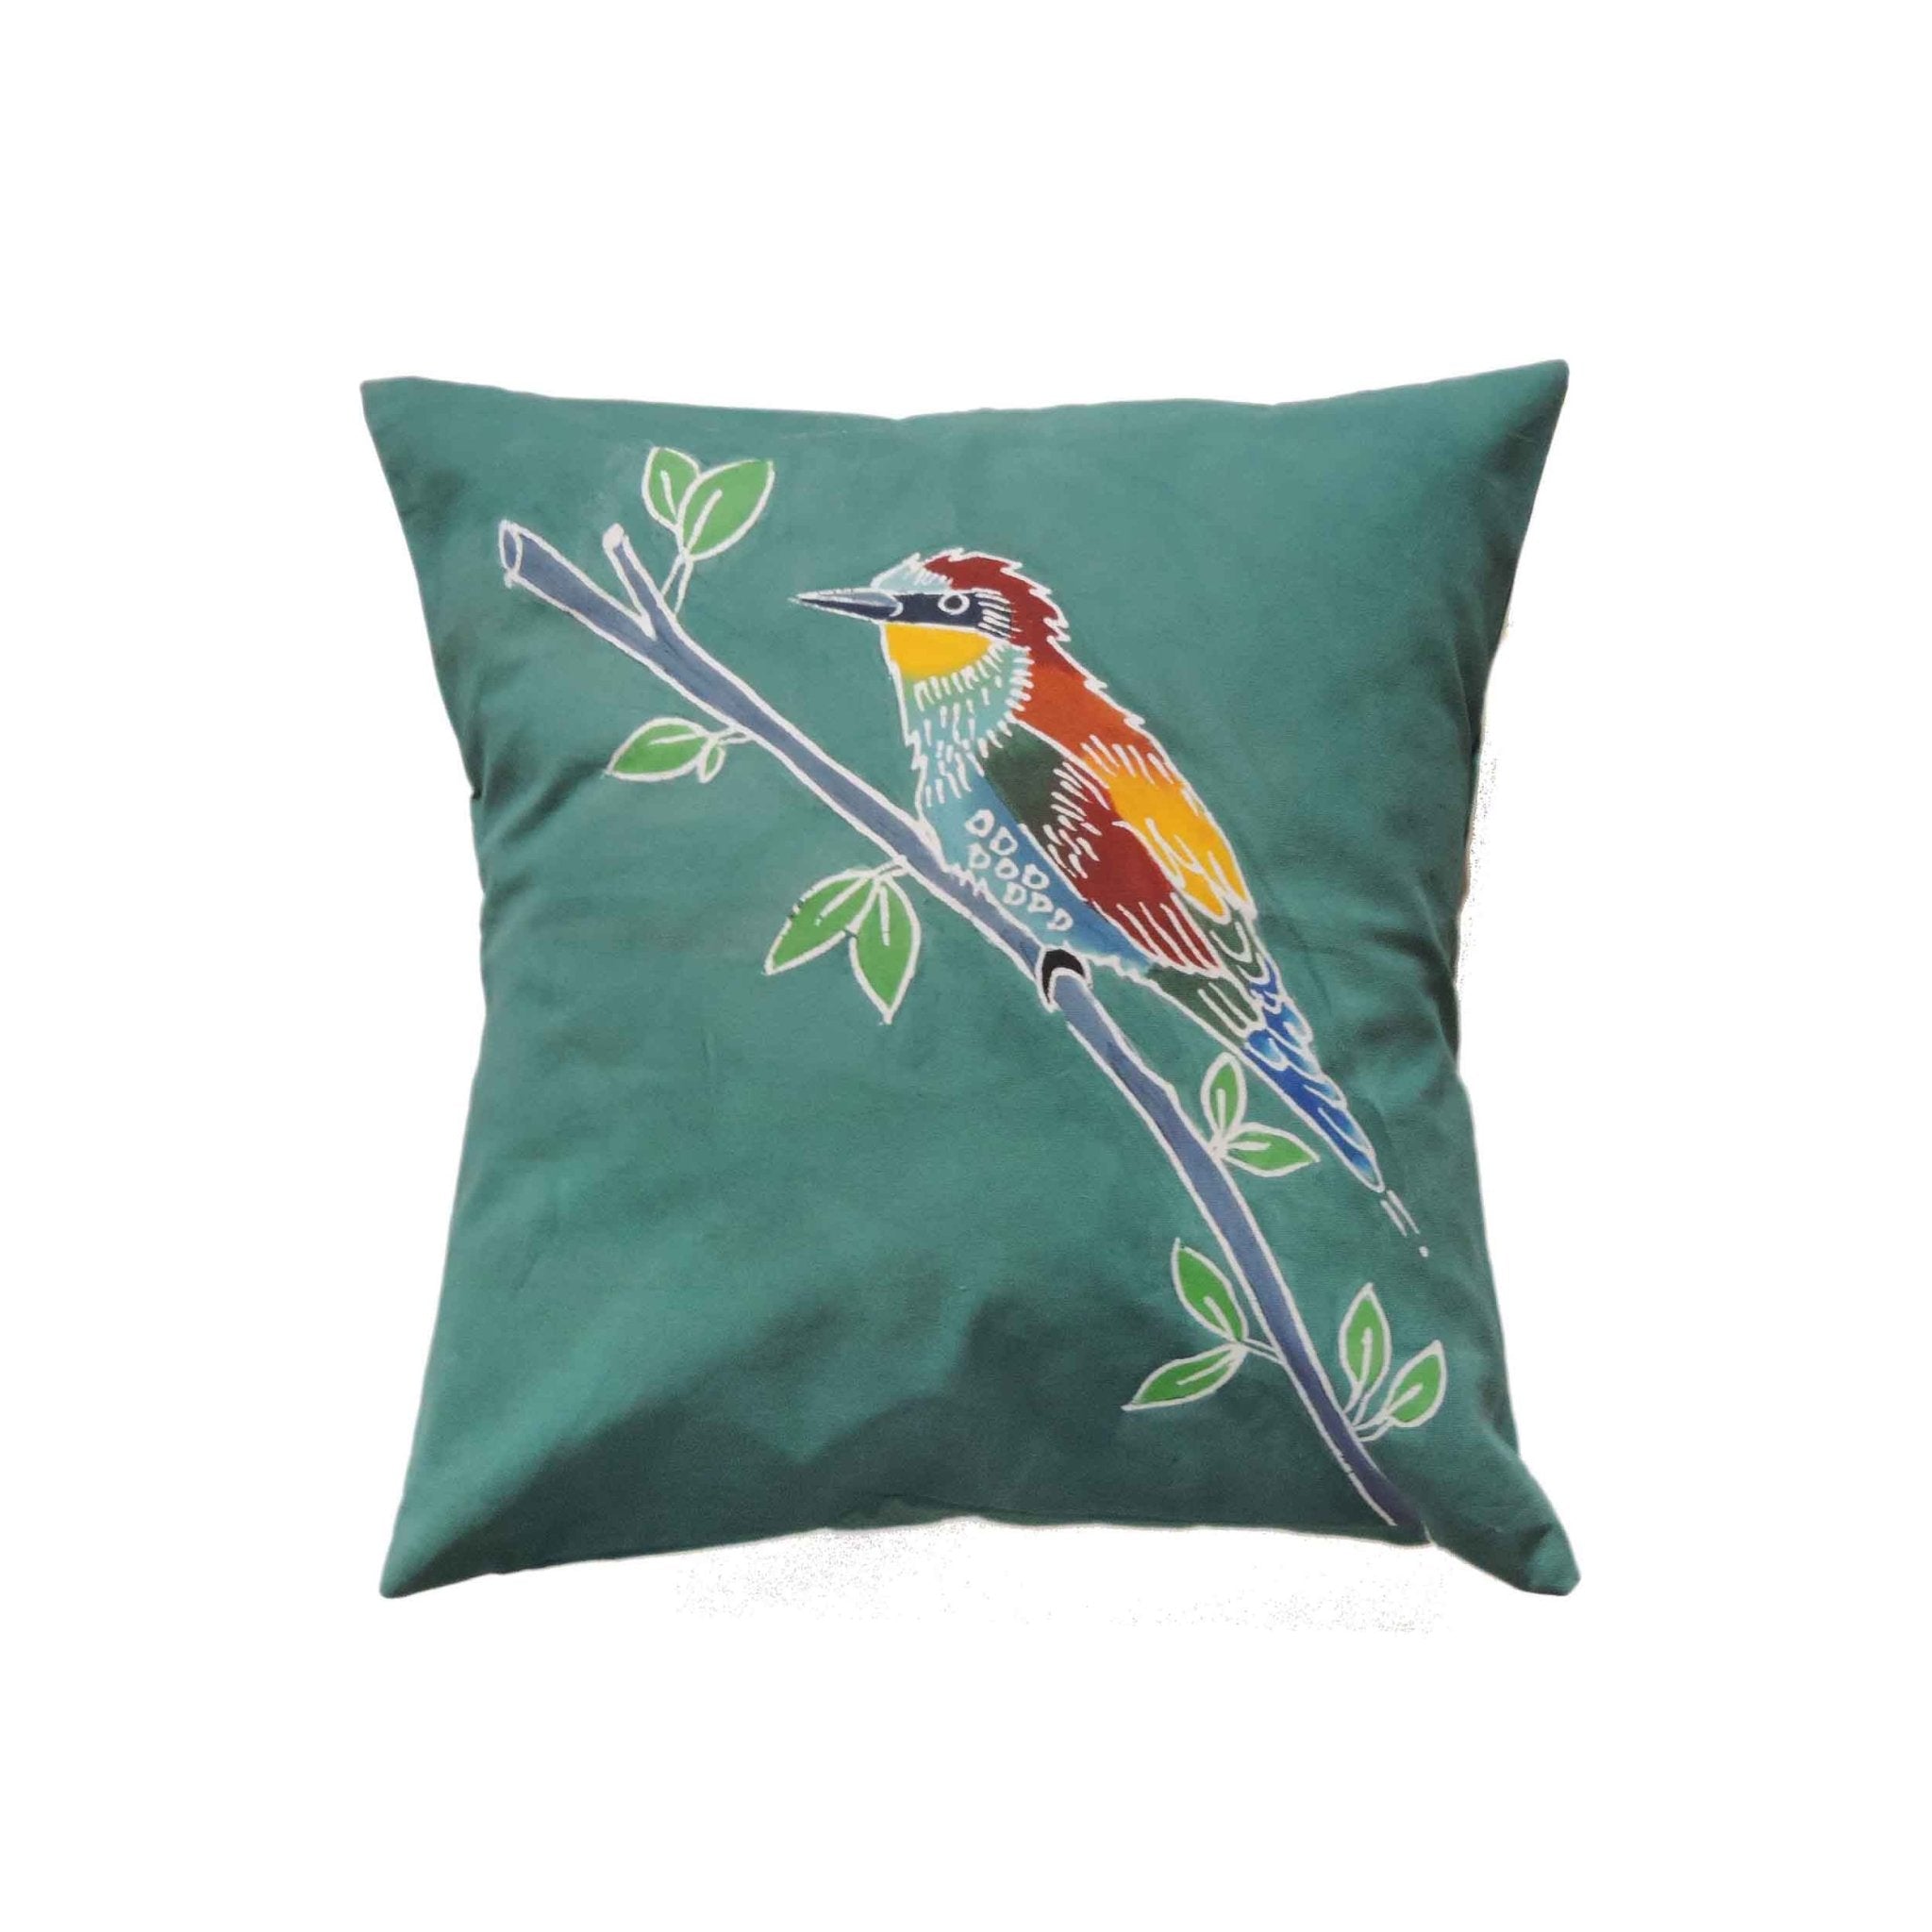 Papiko European Bee-Eater Cushion Cover - Handmade by TRIBAL TEXTILES - Handcrafted Home Decor Interiors - African Made